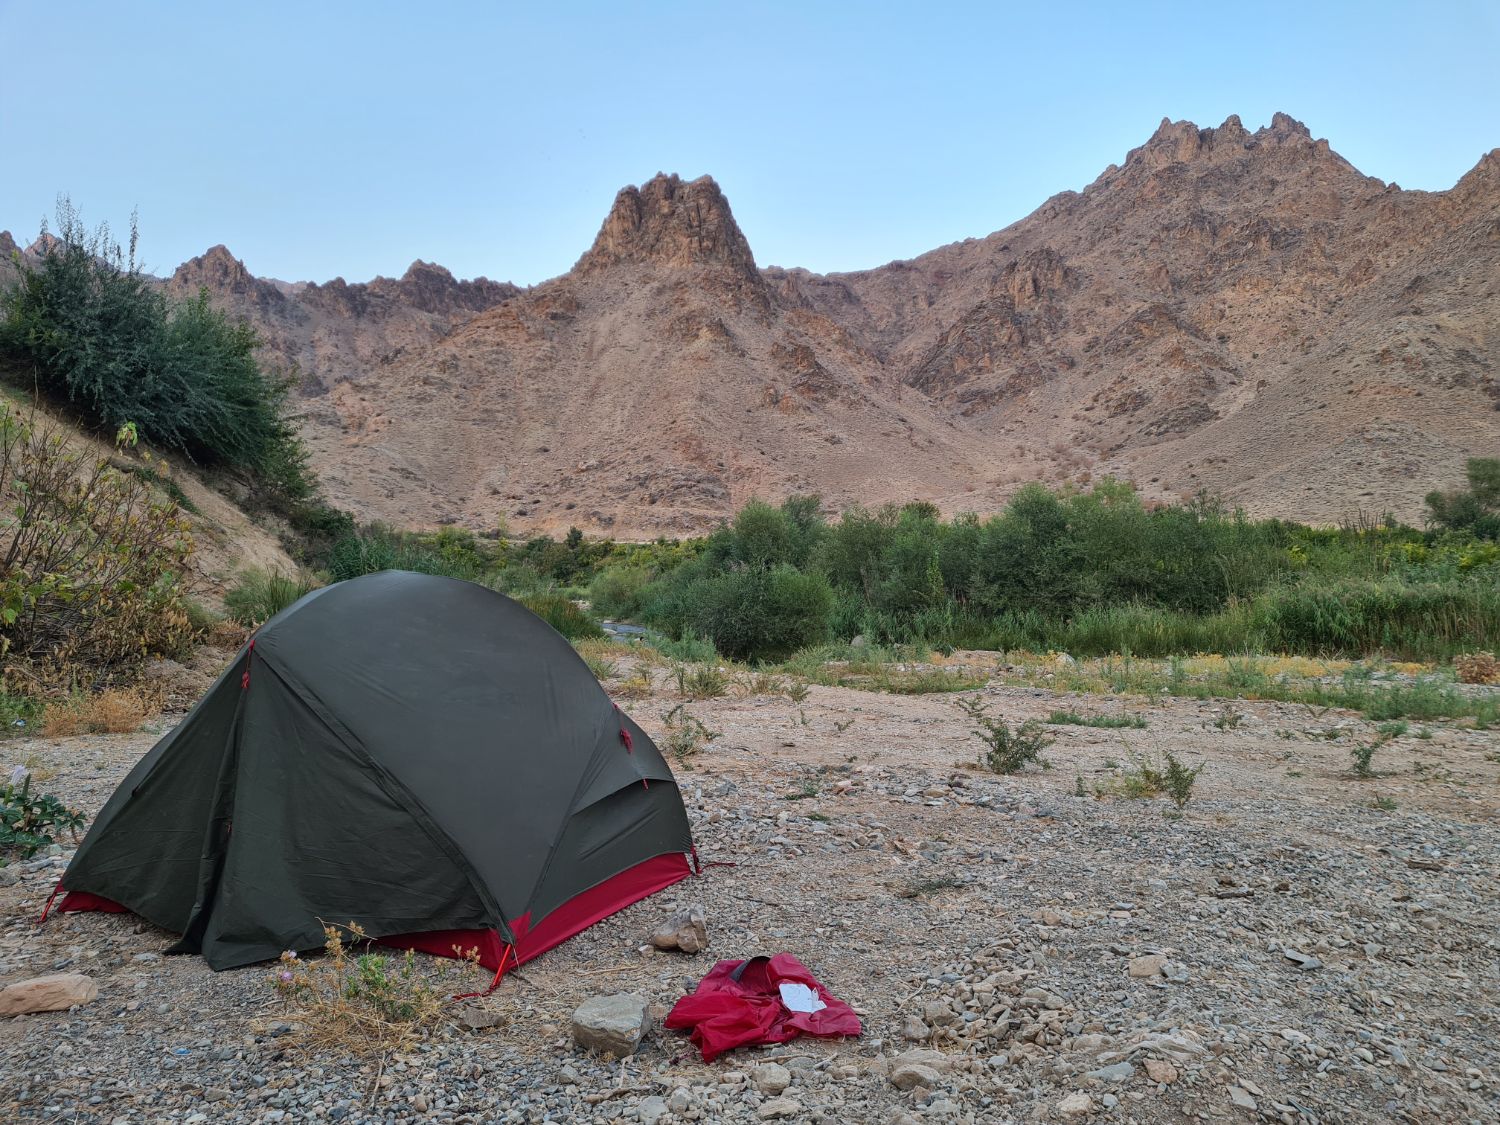 Our first night in Iran